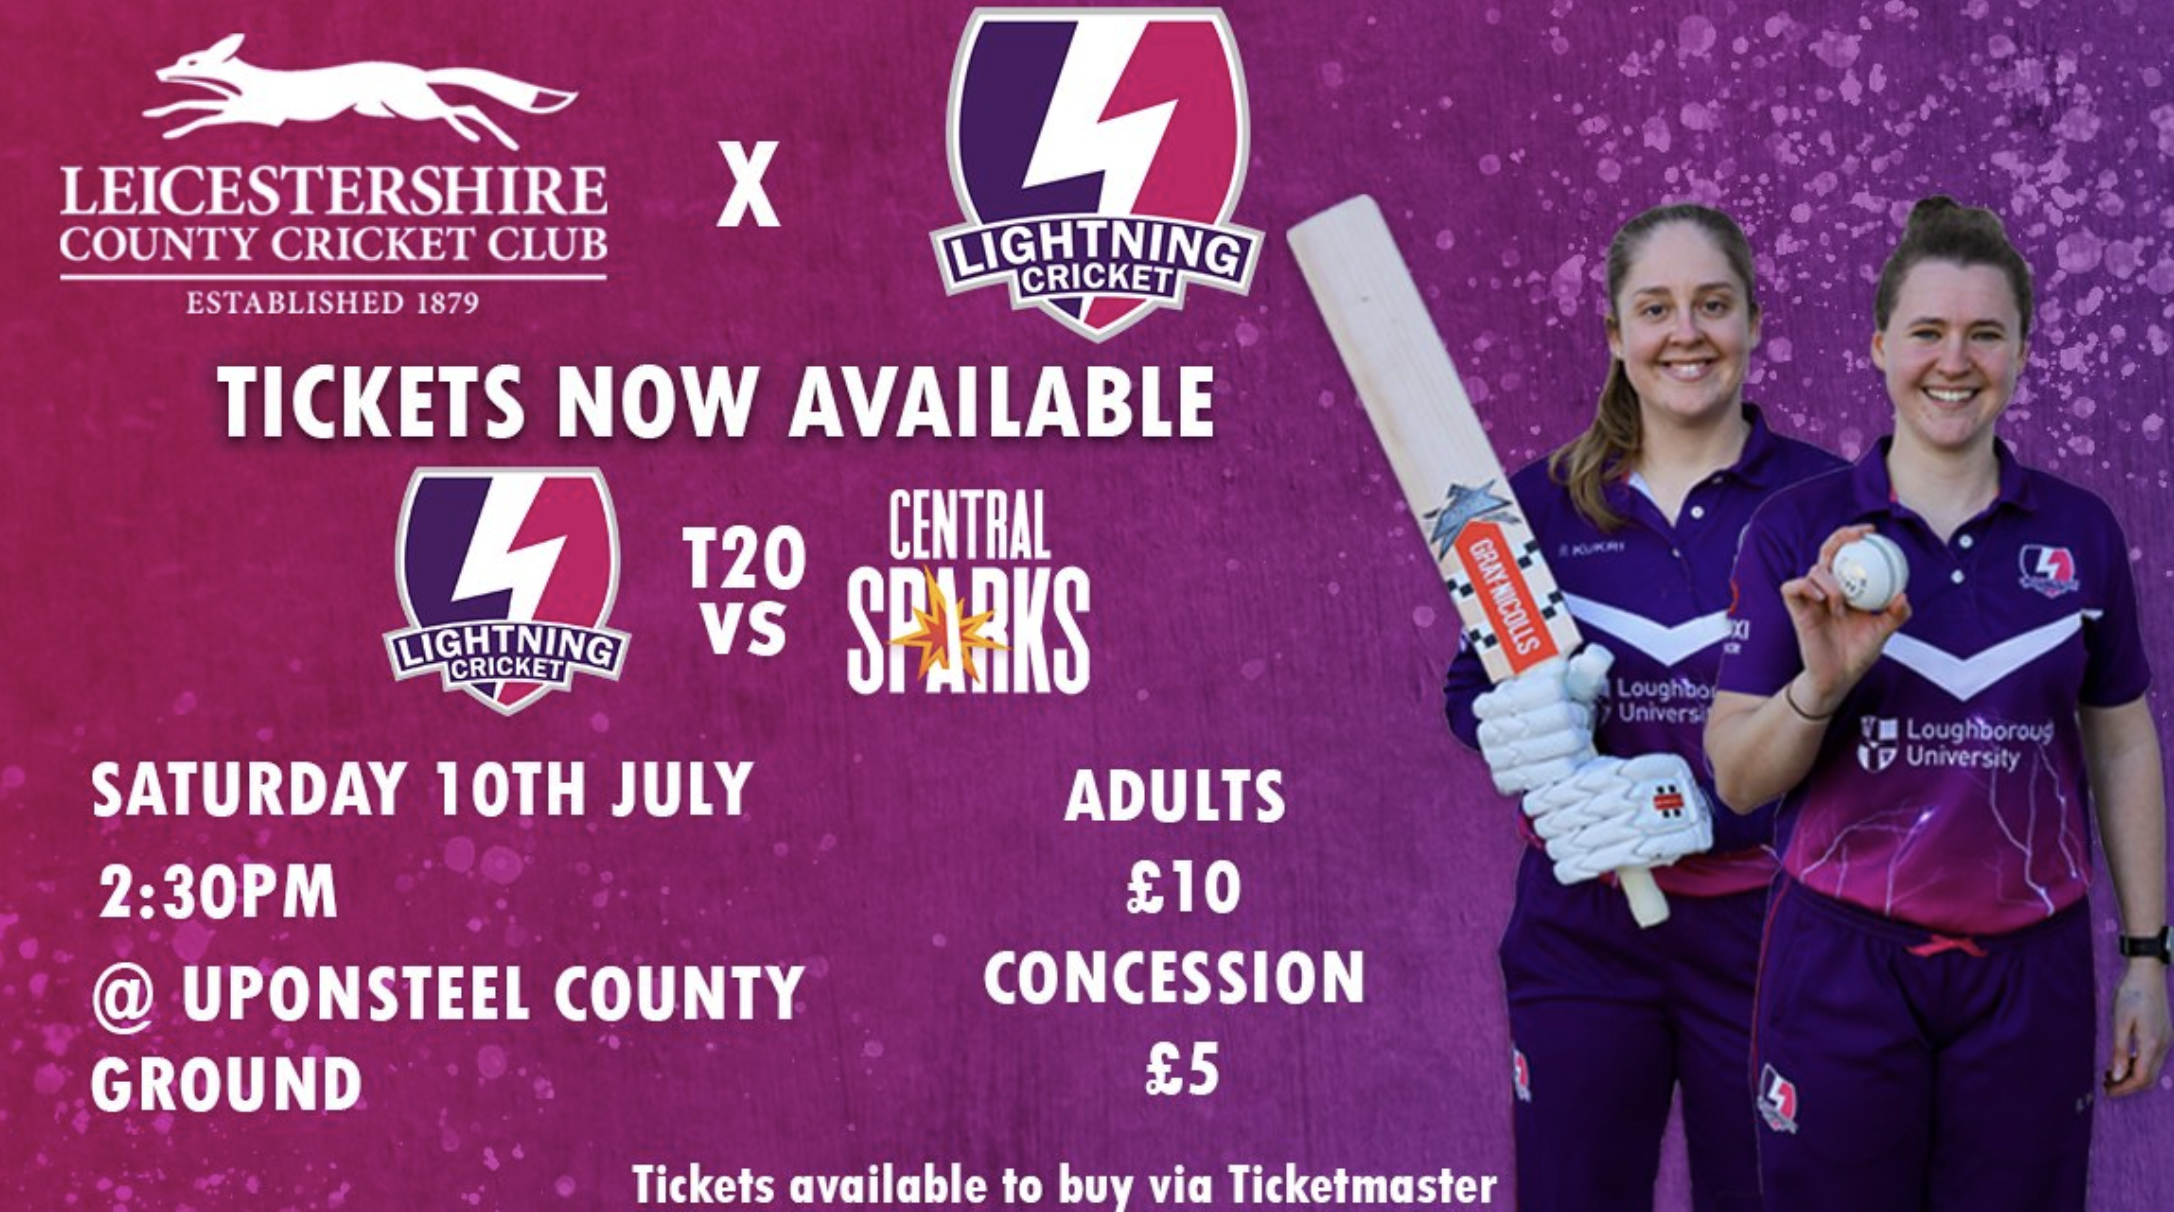 Leicestershire County Cricket Club x Lightning Cricket. Tickets now available Lightning Cricket T20 Vs Central Sparks. Saturday 10th July, 2:30. Adults £10, Concession £5. @ Upton Steel County Ground. Tickets available to buy via Ticketmaster.